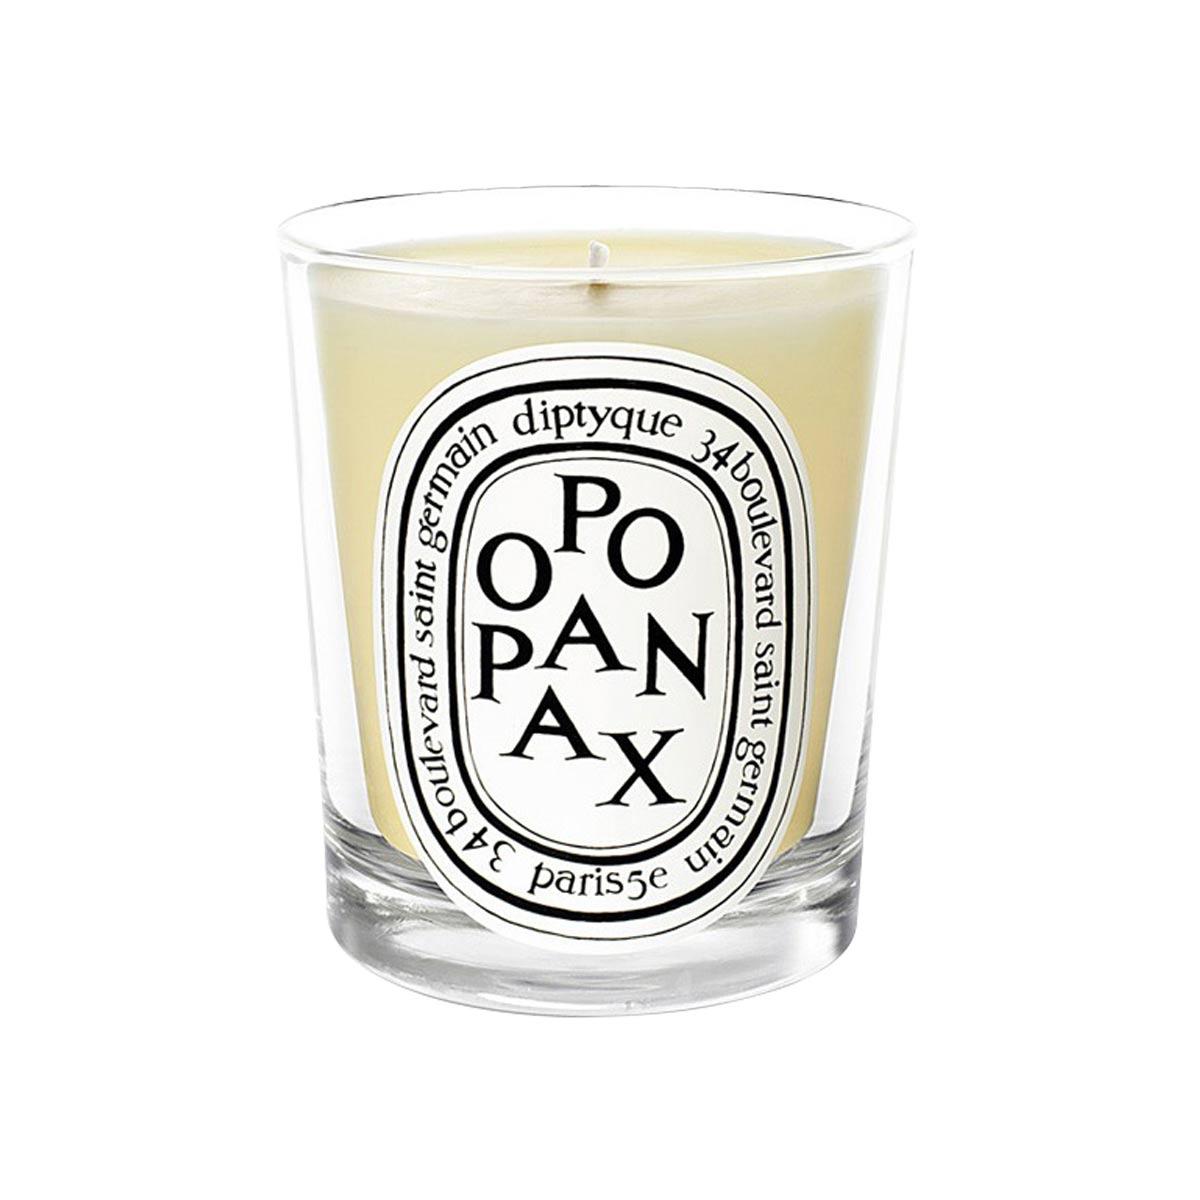 Primary image of Opopanax Candle